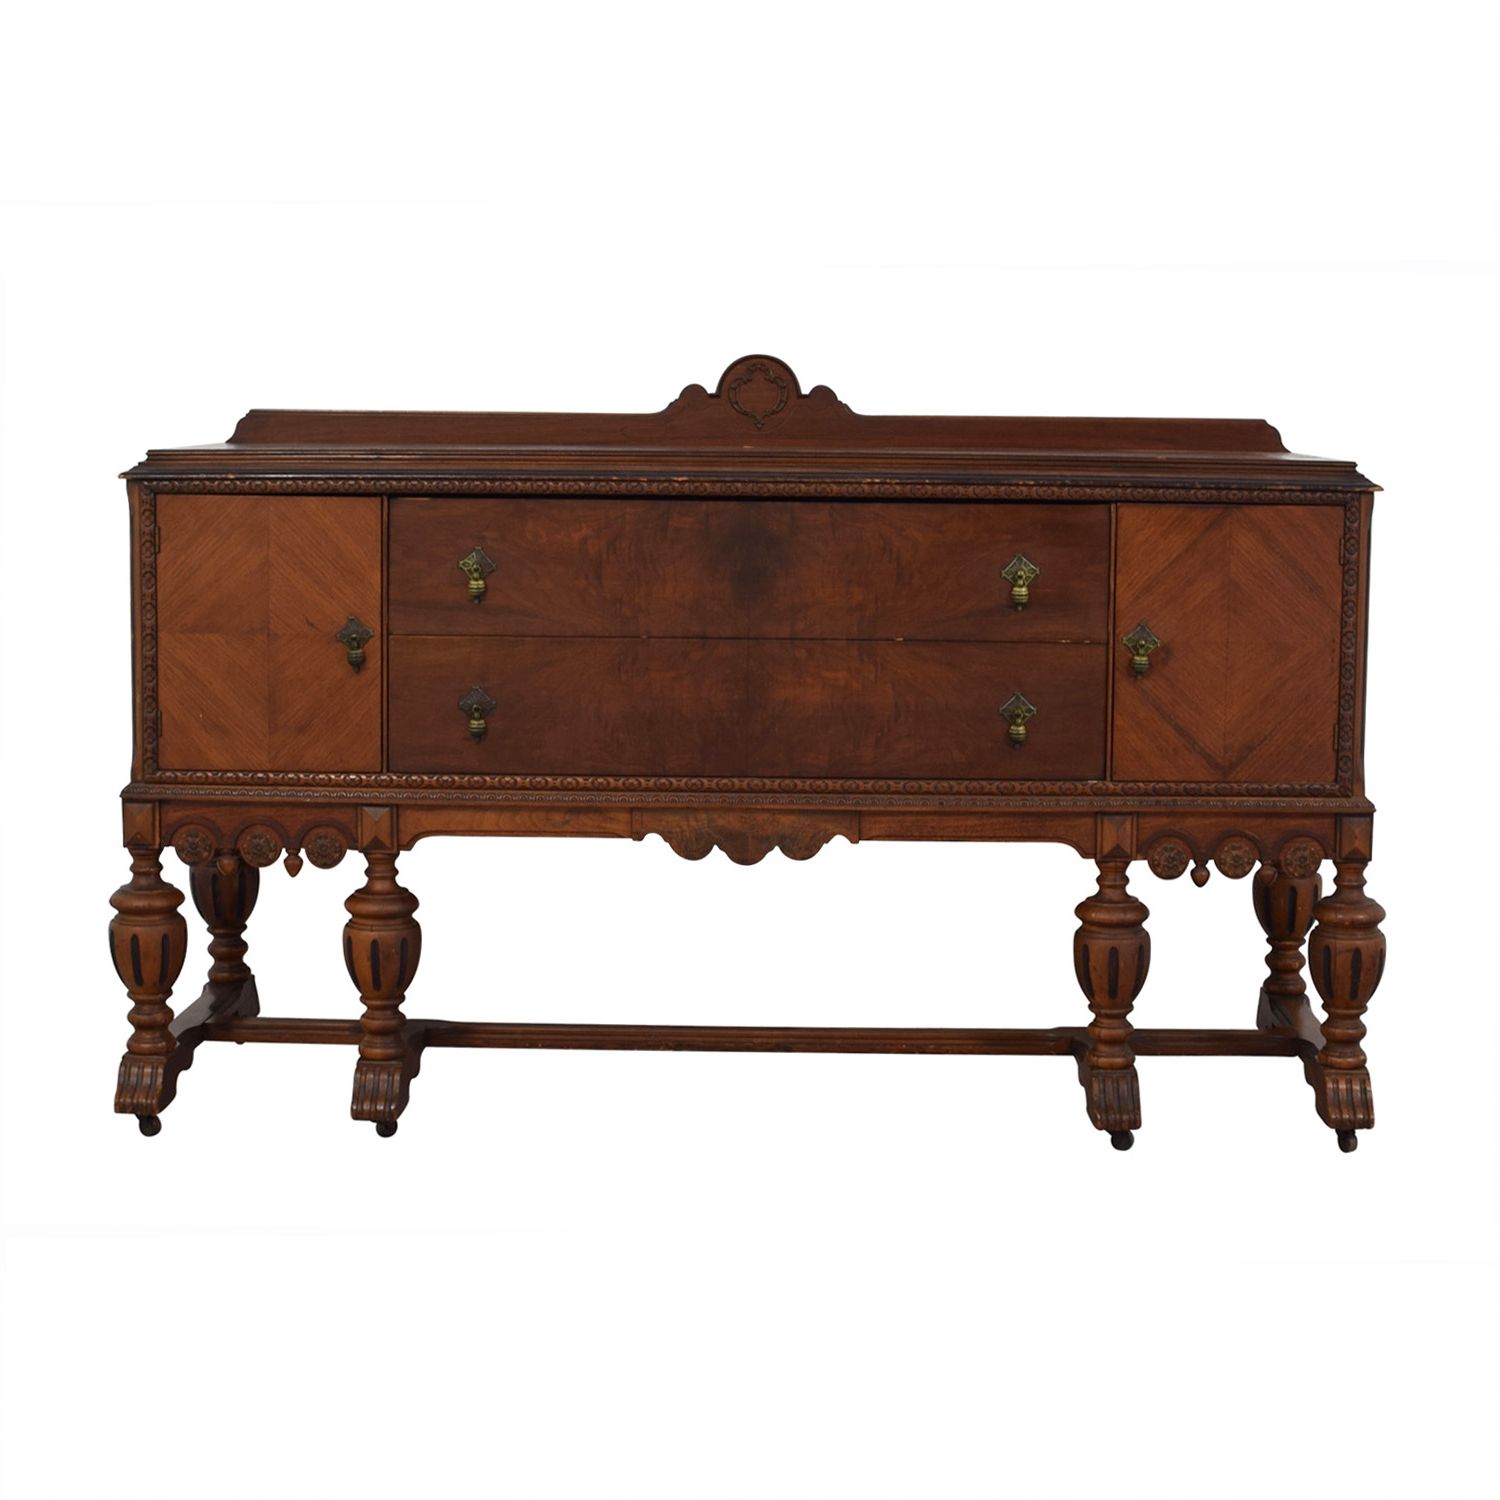 [%75% Off – Antique Two Drawer Wood Buffet Sideboard / Storage For Newest 29.5" Wide 2 Drawer Wood Sideboards|29.5" Wide 2 Drawer Wood Sideboards Inside Fashionable 75% Off – Antique Two Drawer Wood Buffet Sideboard / Storage|trendy 29.5" Wide 2 Drawer Wood Sideboards Within 75% Off – Antique Two Drawer Wood Buffet Sideboard / Storage|most Up To Date 75% Off – Antique Two Drawer Wood Buffet Sideboard / Storage Regarding  (View 7 of 20)